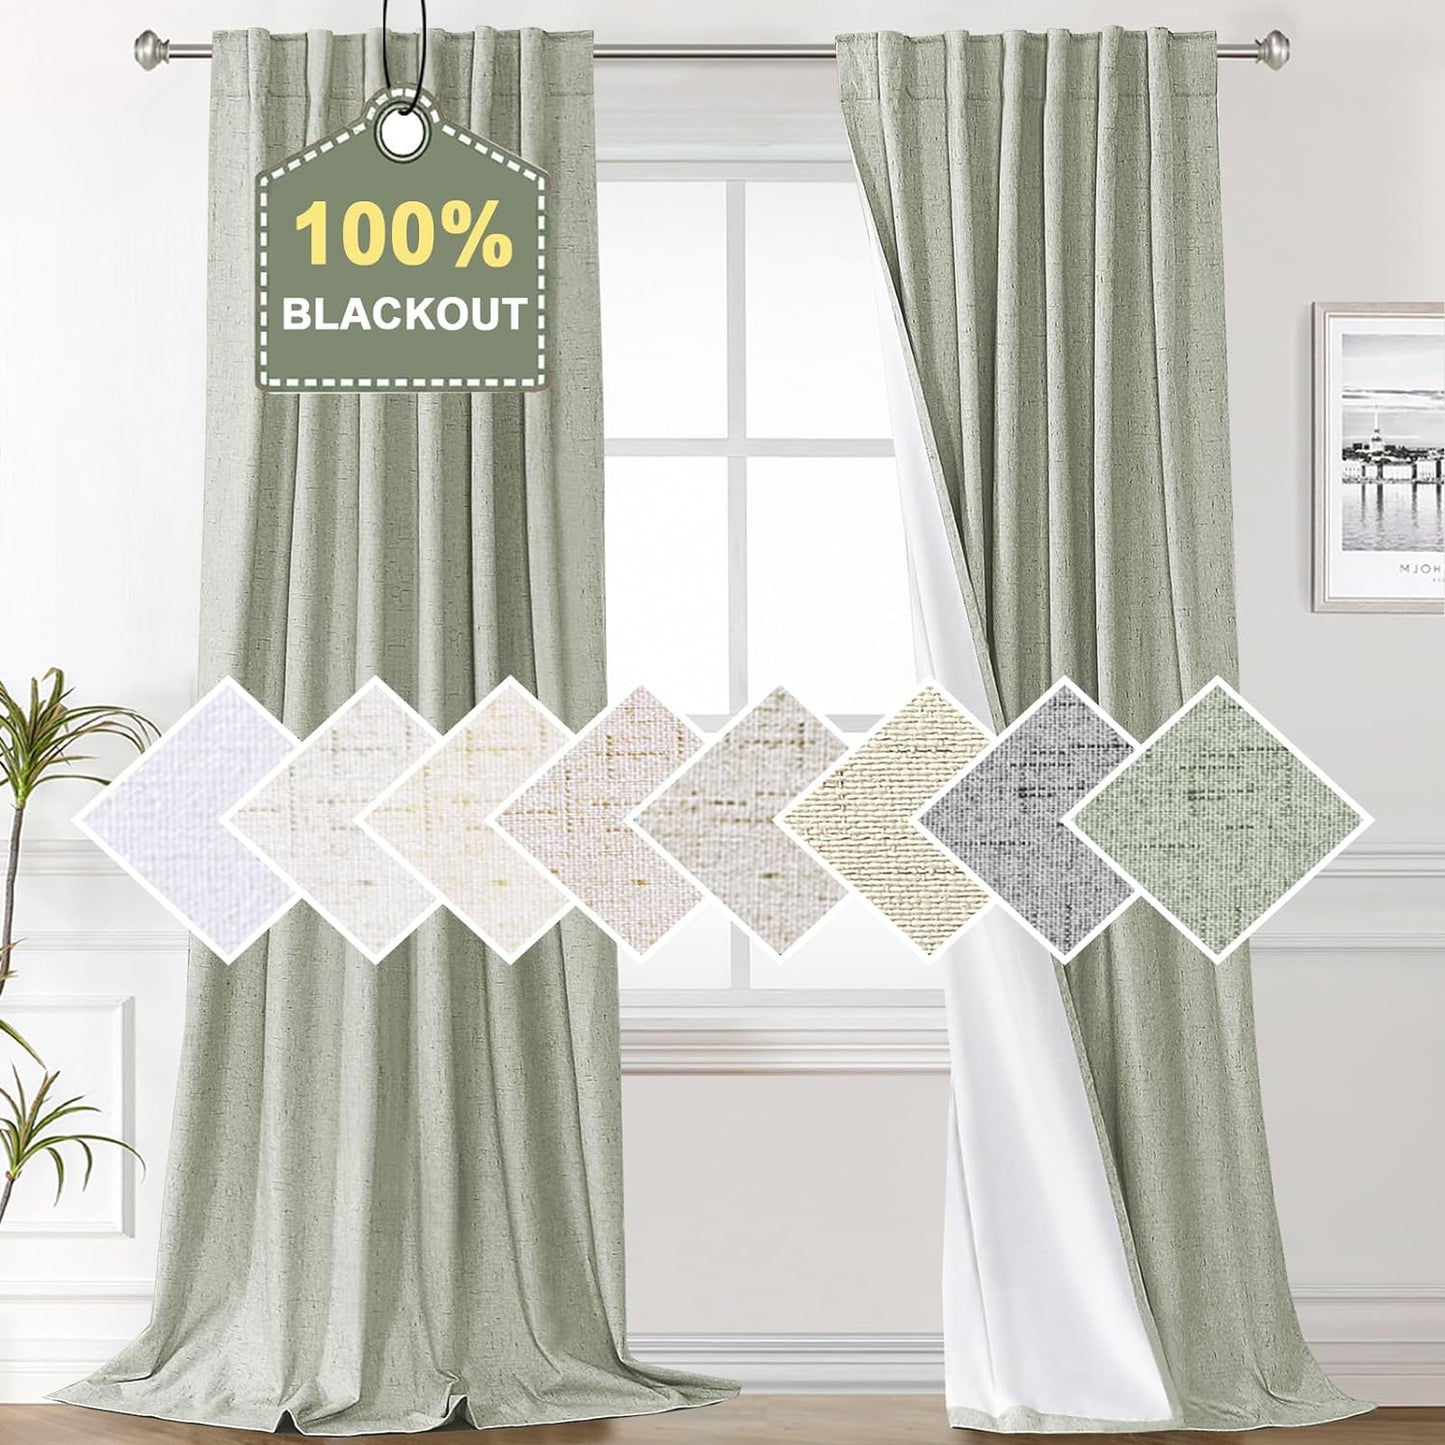 H.VERSAILTEX 100% Blackout Curtains 96 Inches Long Thermal Insulated Linen Blackout Curtains for Bedroom 96 Length, Boho Farmhouse Curtains & Drapes for Living Room - Natural, W52 X L96, 2 Panels  H.VERSAILTEX Sage 52"W X 84"L 